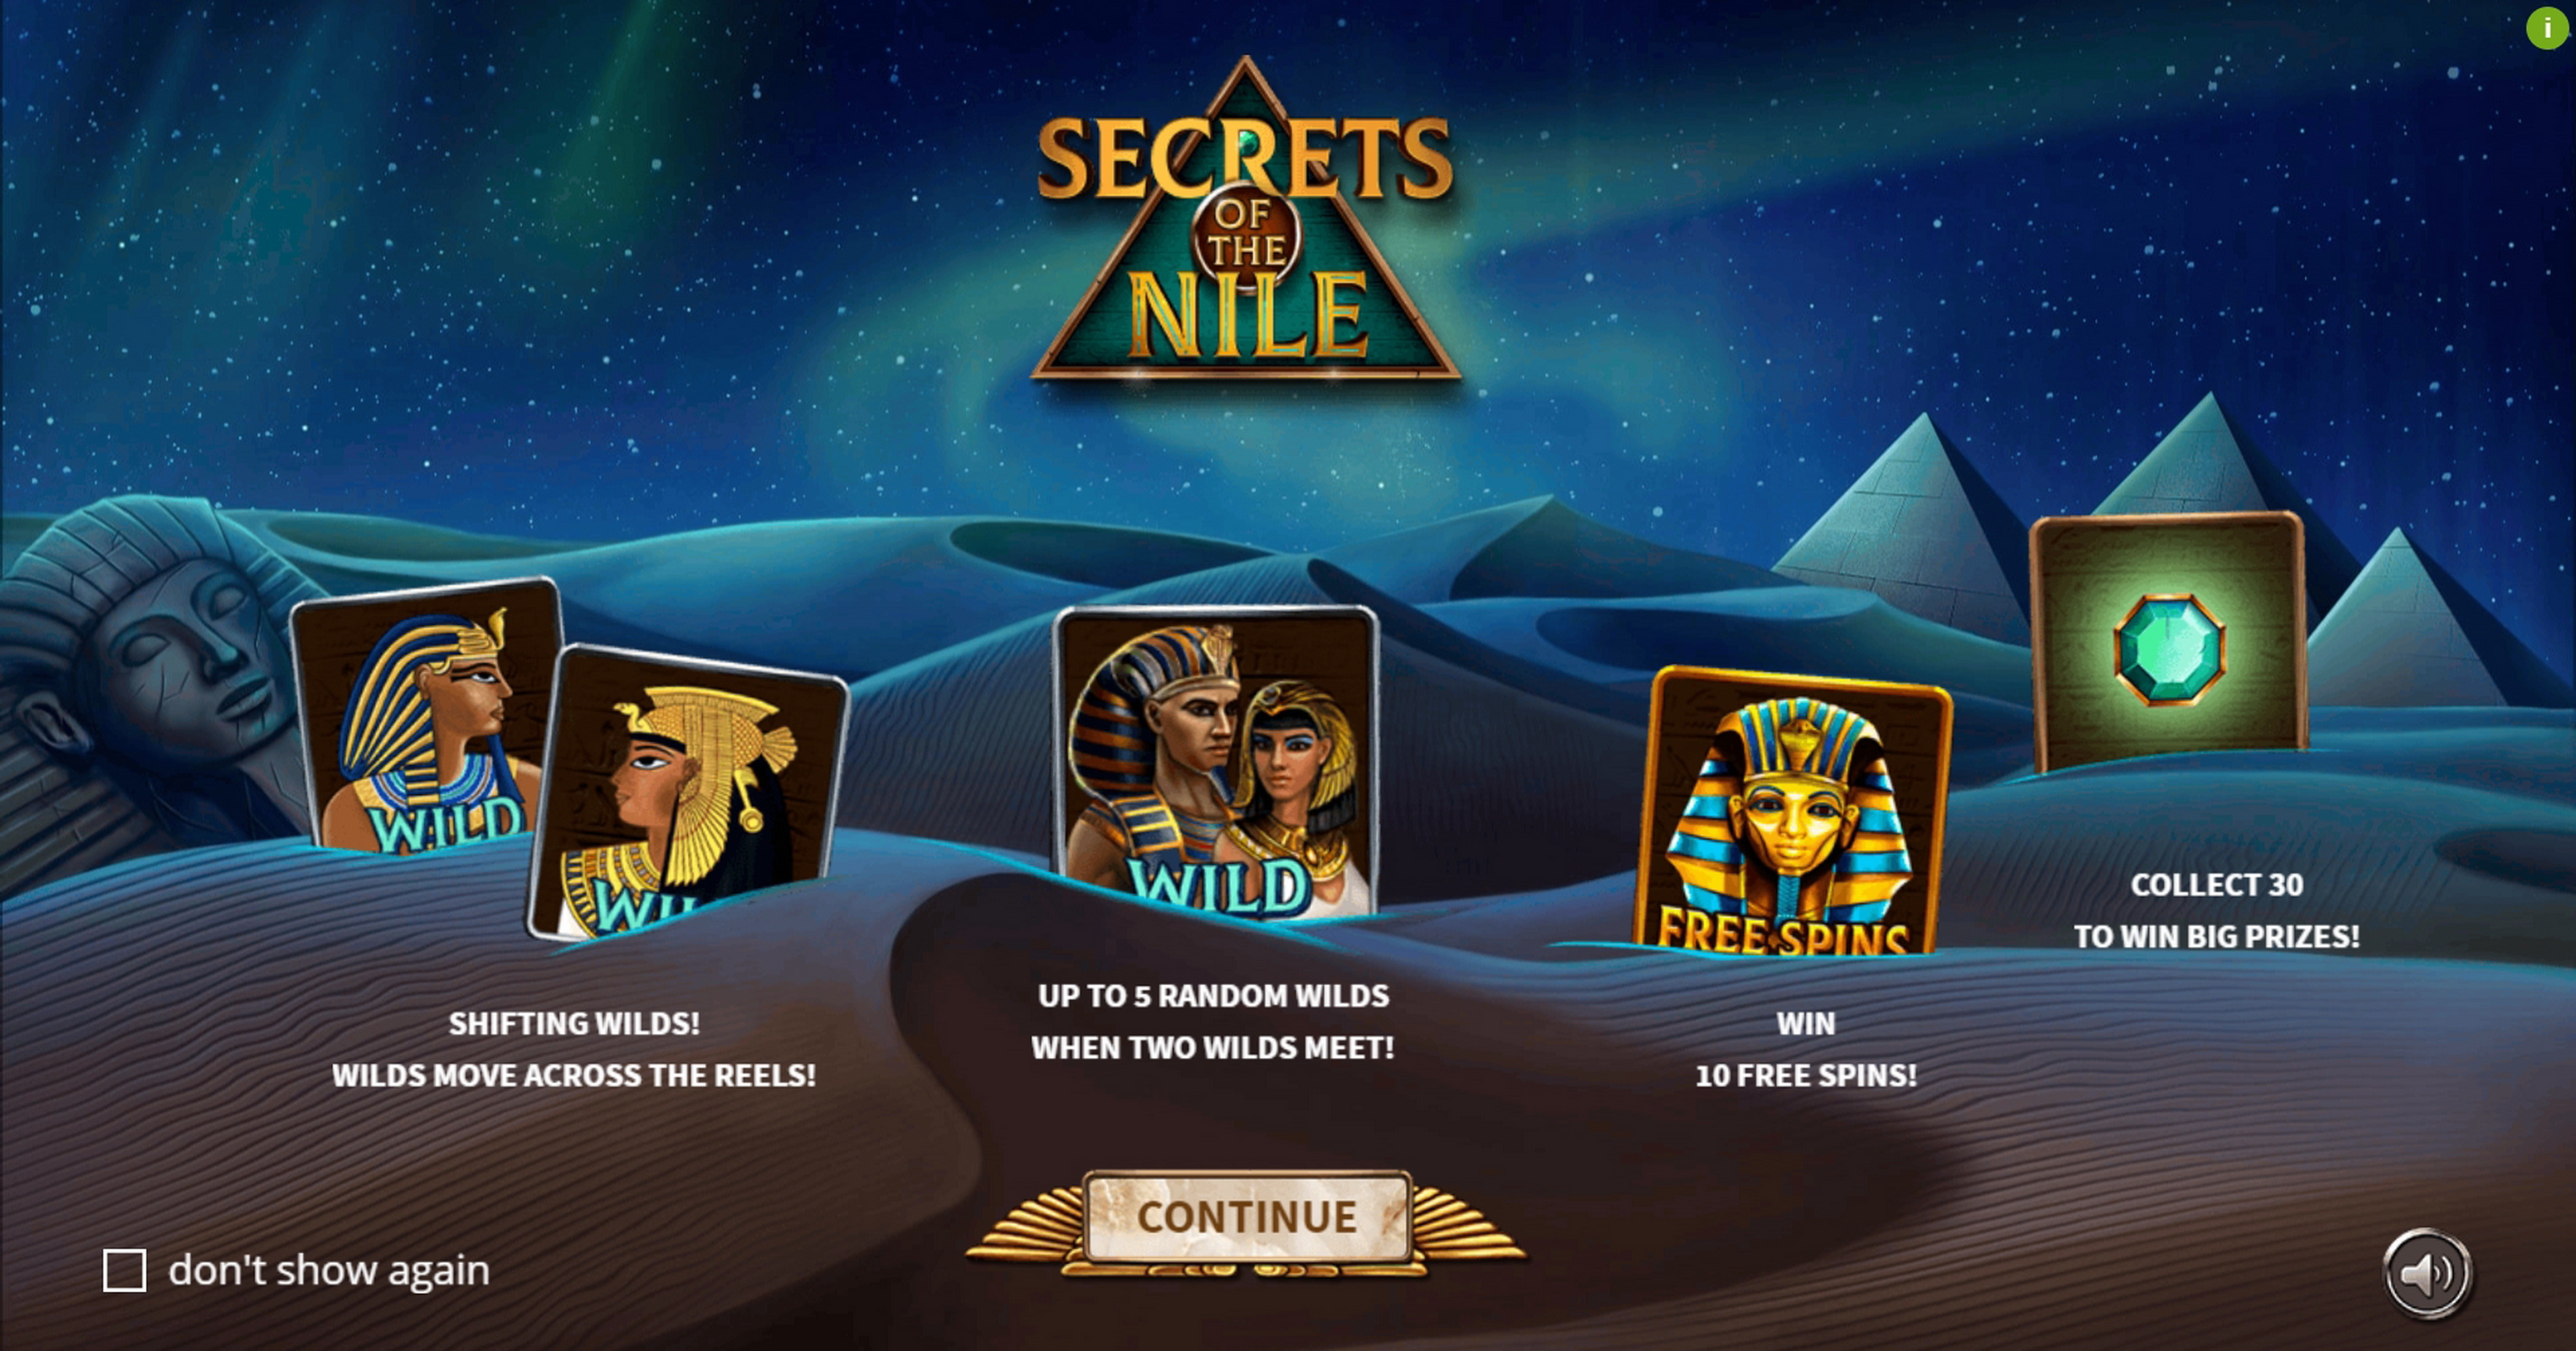 Play Secrets of the Nile Free Casino Slot Game by Leap